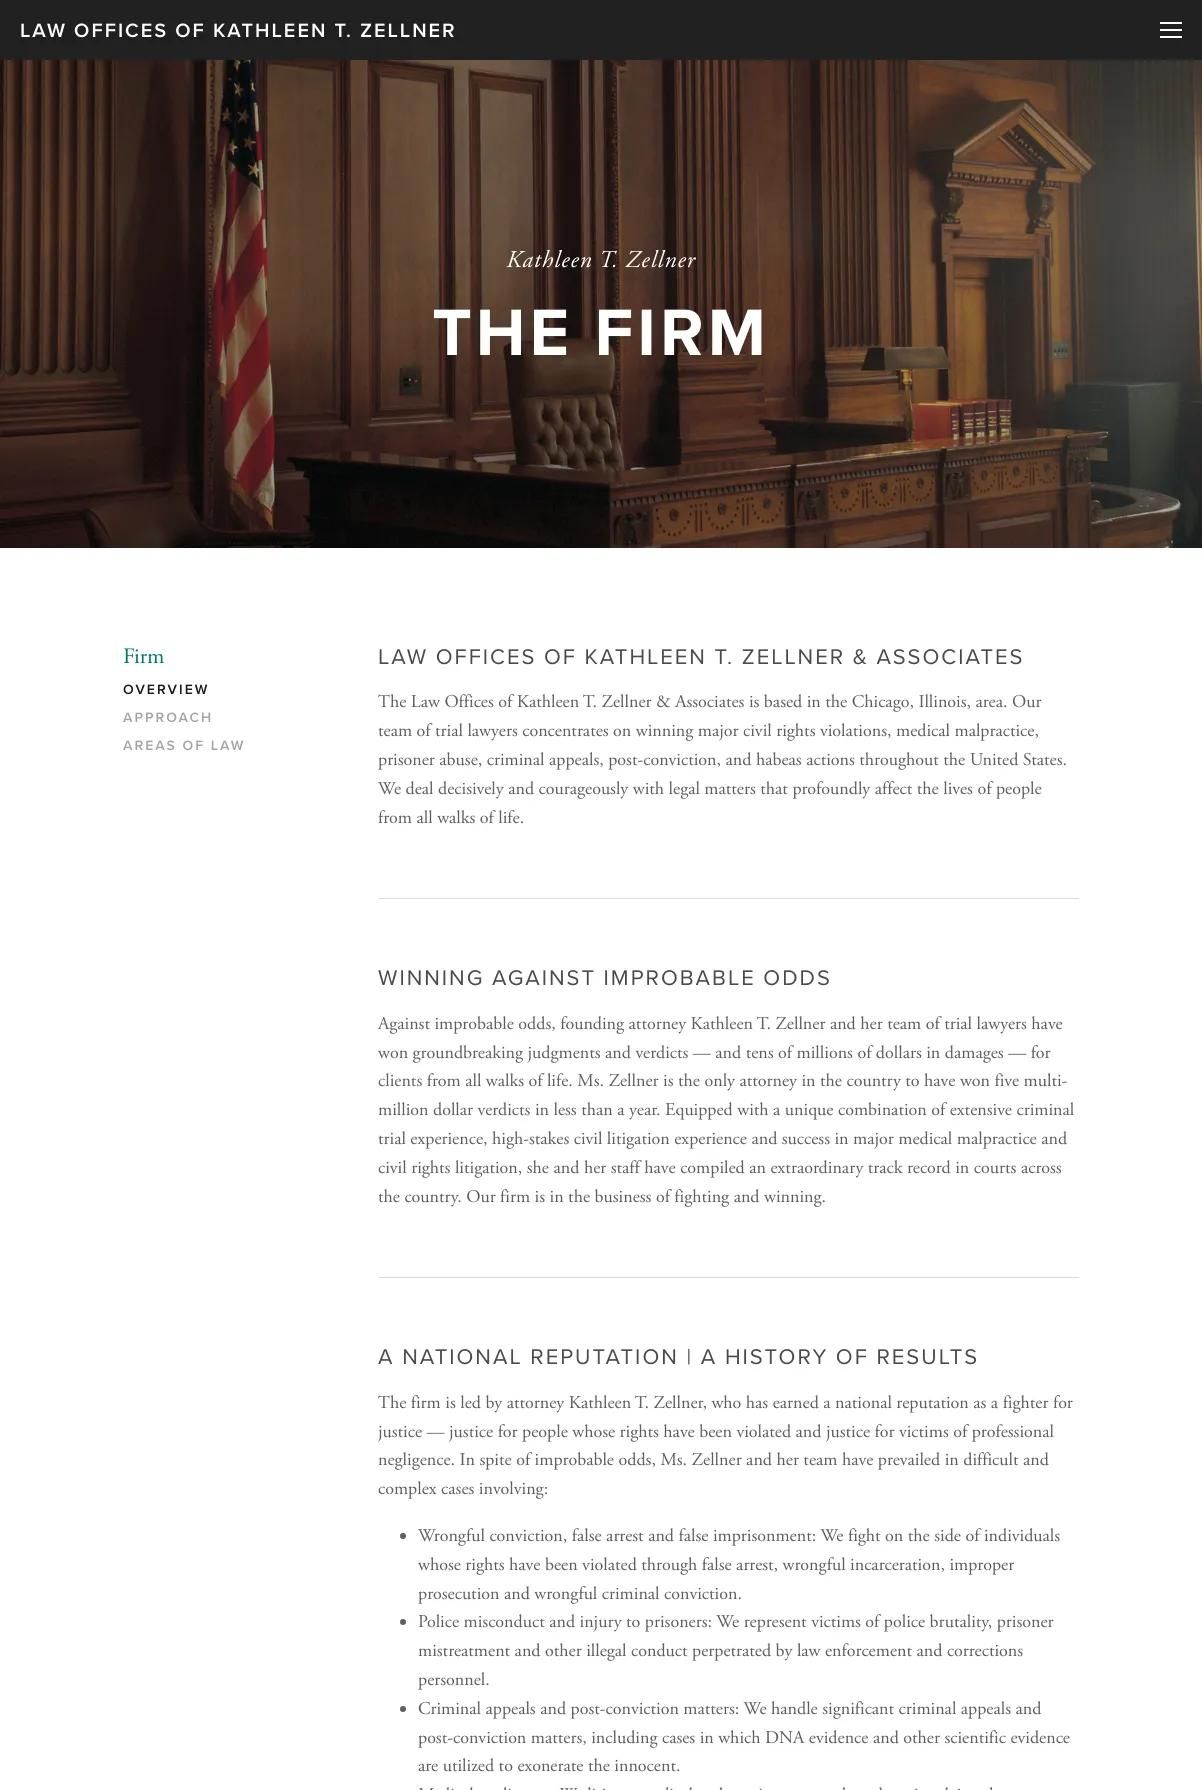 Screenshot 2 of Law Offices of Kathleen T. Zellner & Associates (Example Squarespace Law Firm Website)